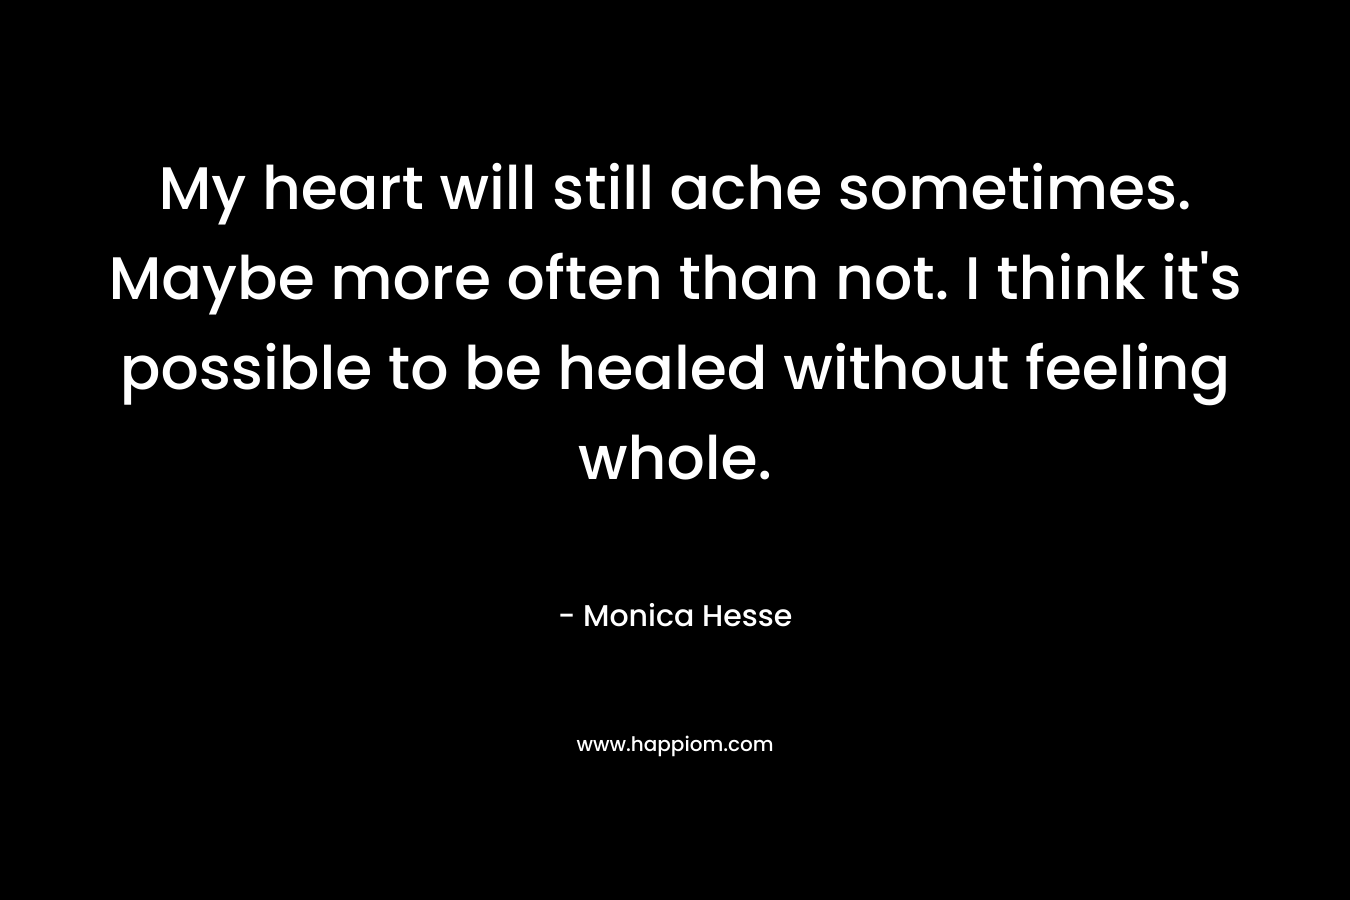 My heart will still ache sometimes. Maybe more often than not. I think it's possible to be healed without feeling whole.